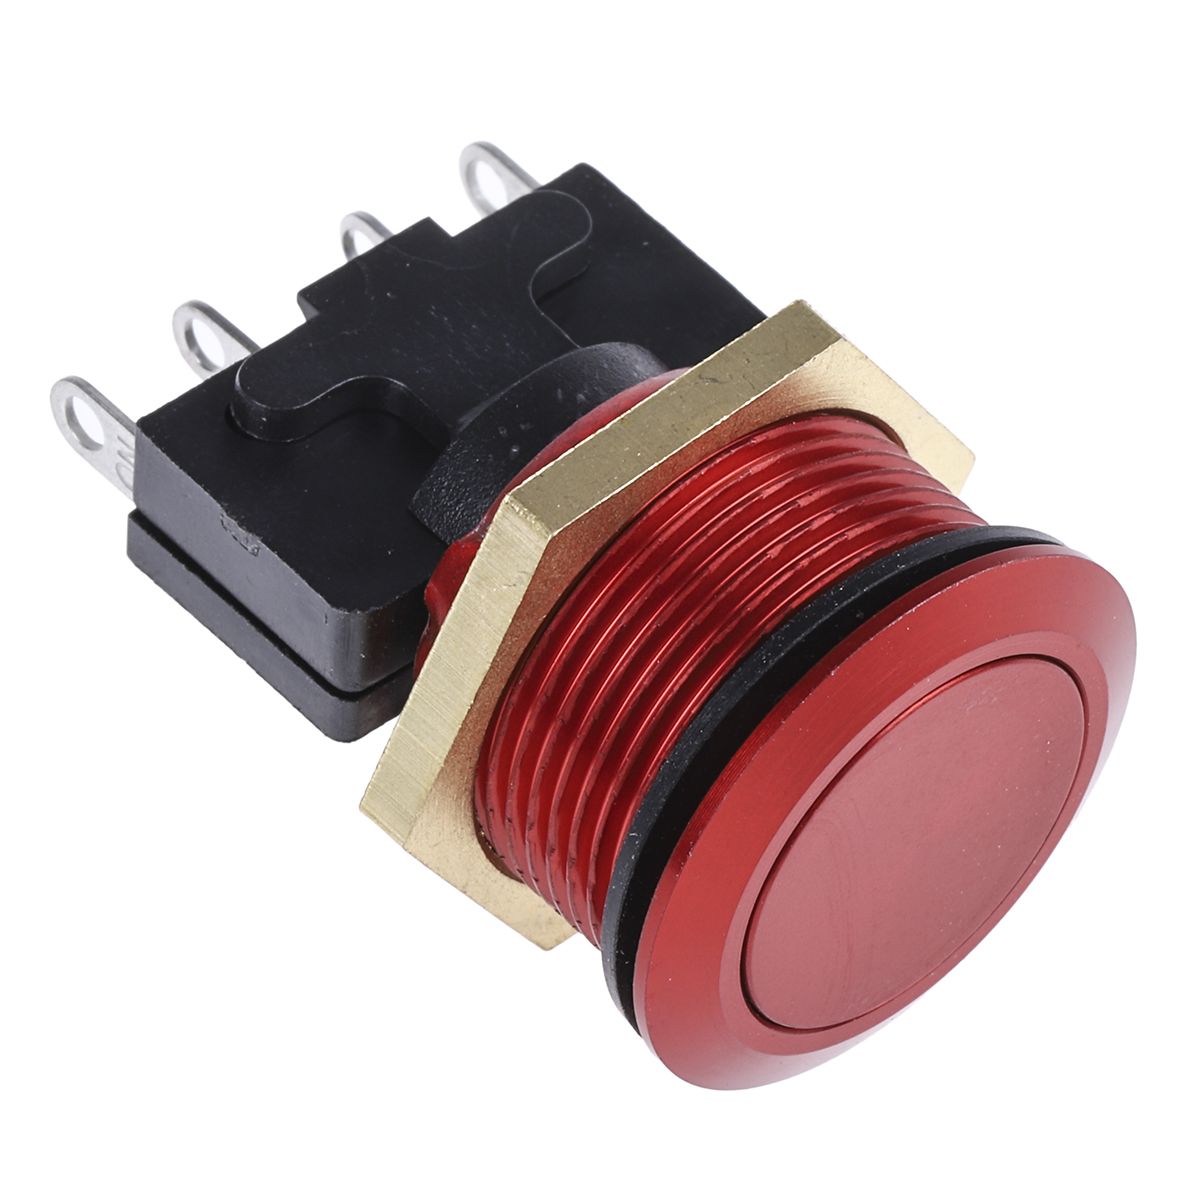 ITW Switches 76-95 Series Momentary Push Button Switch, Panel Mount, SPDT, 19.2mm Cutout, 250V ac, IP67